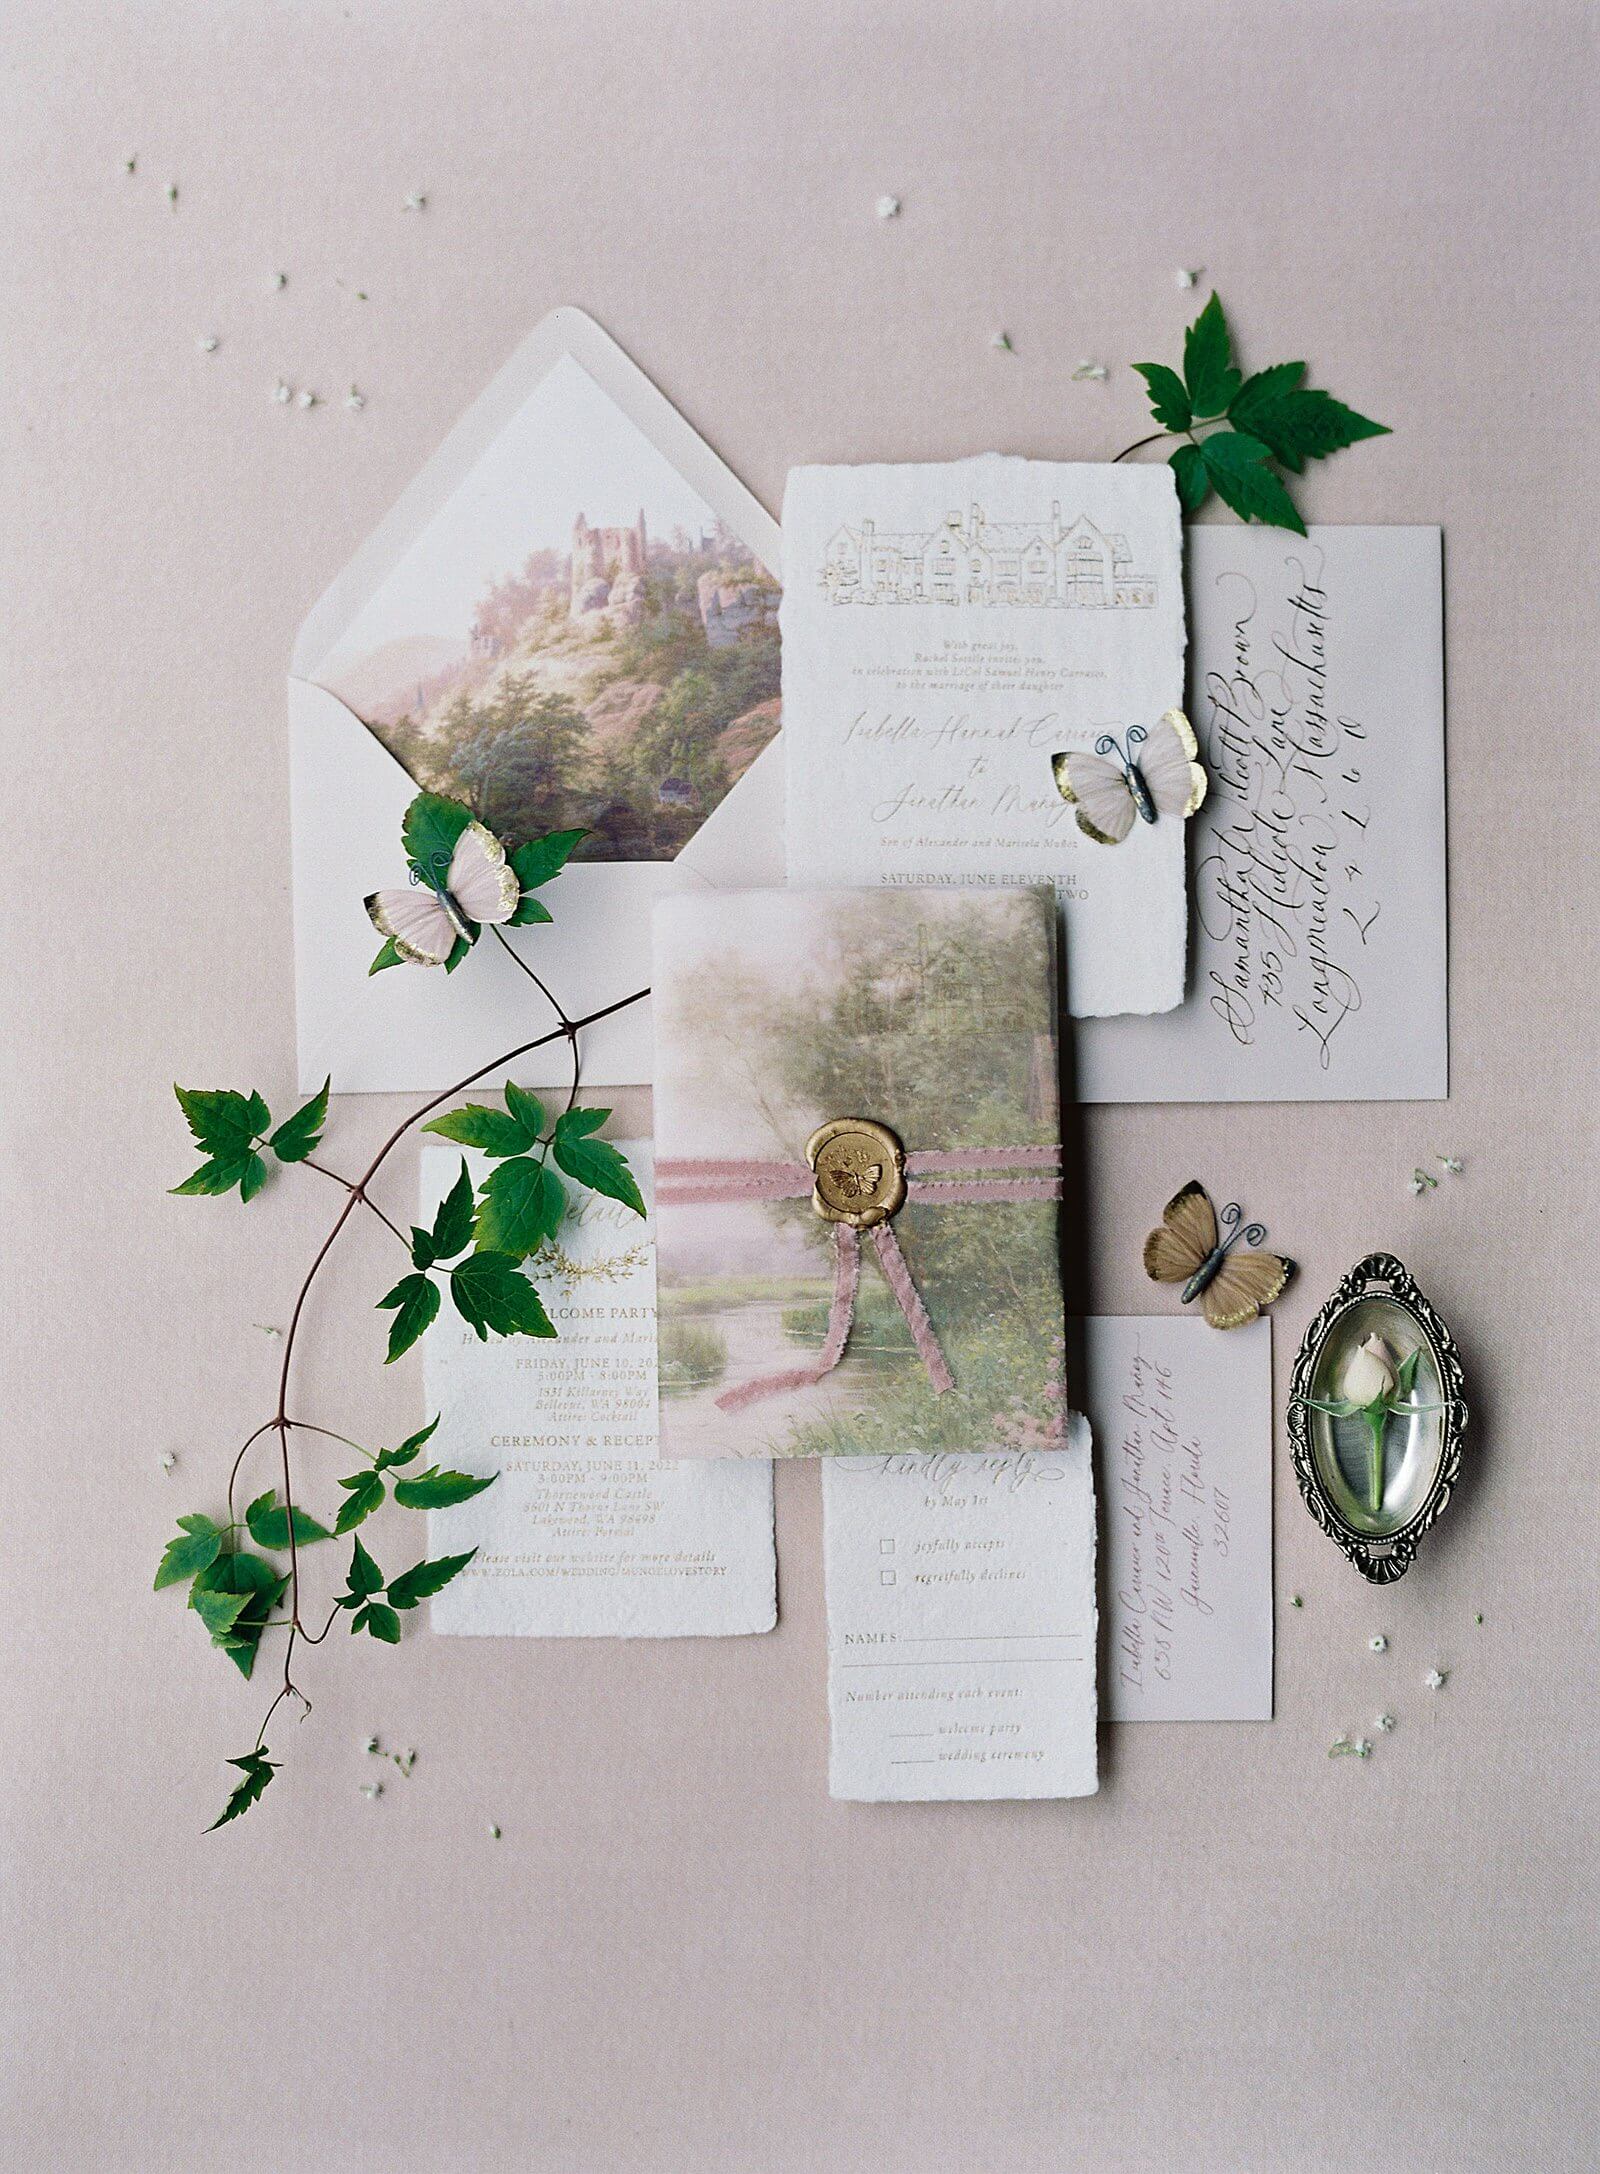 Butterflies on old world wedding stationary in mauve and gold - Jacqueline Benét Photography